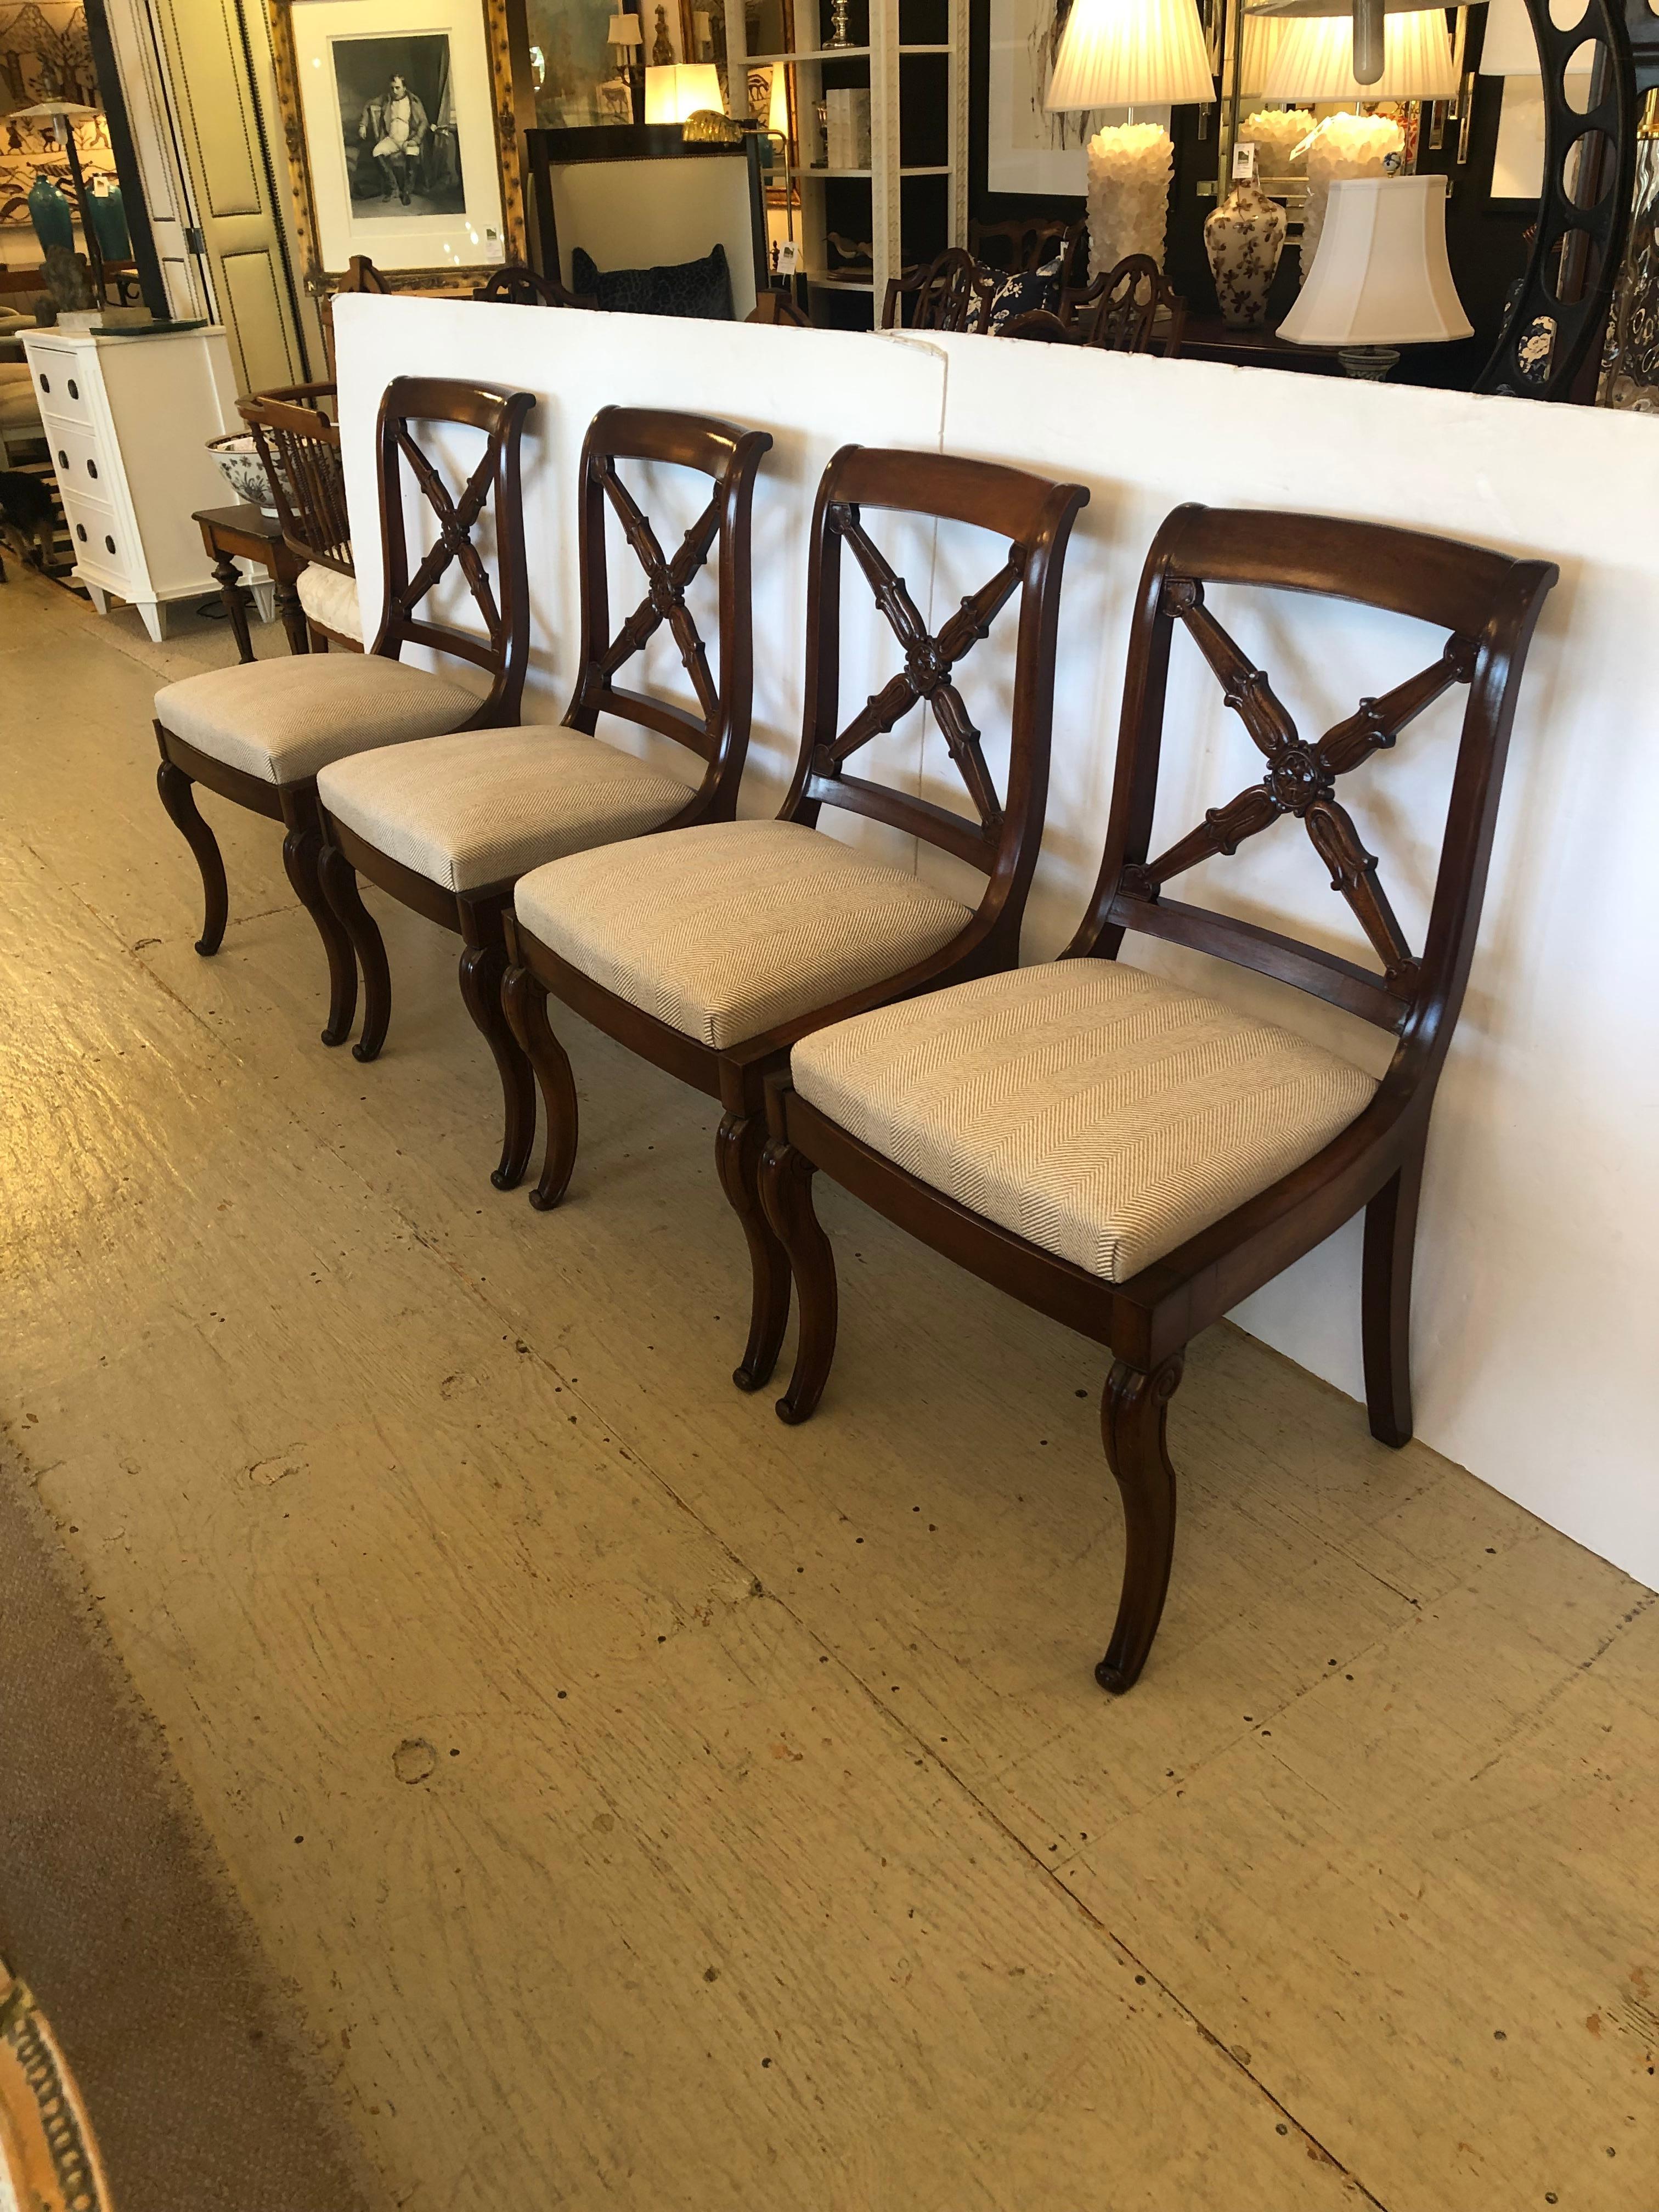 Four fine quality antique mahogany side chairs having carved wood 